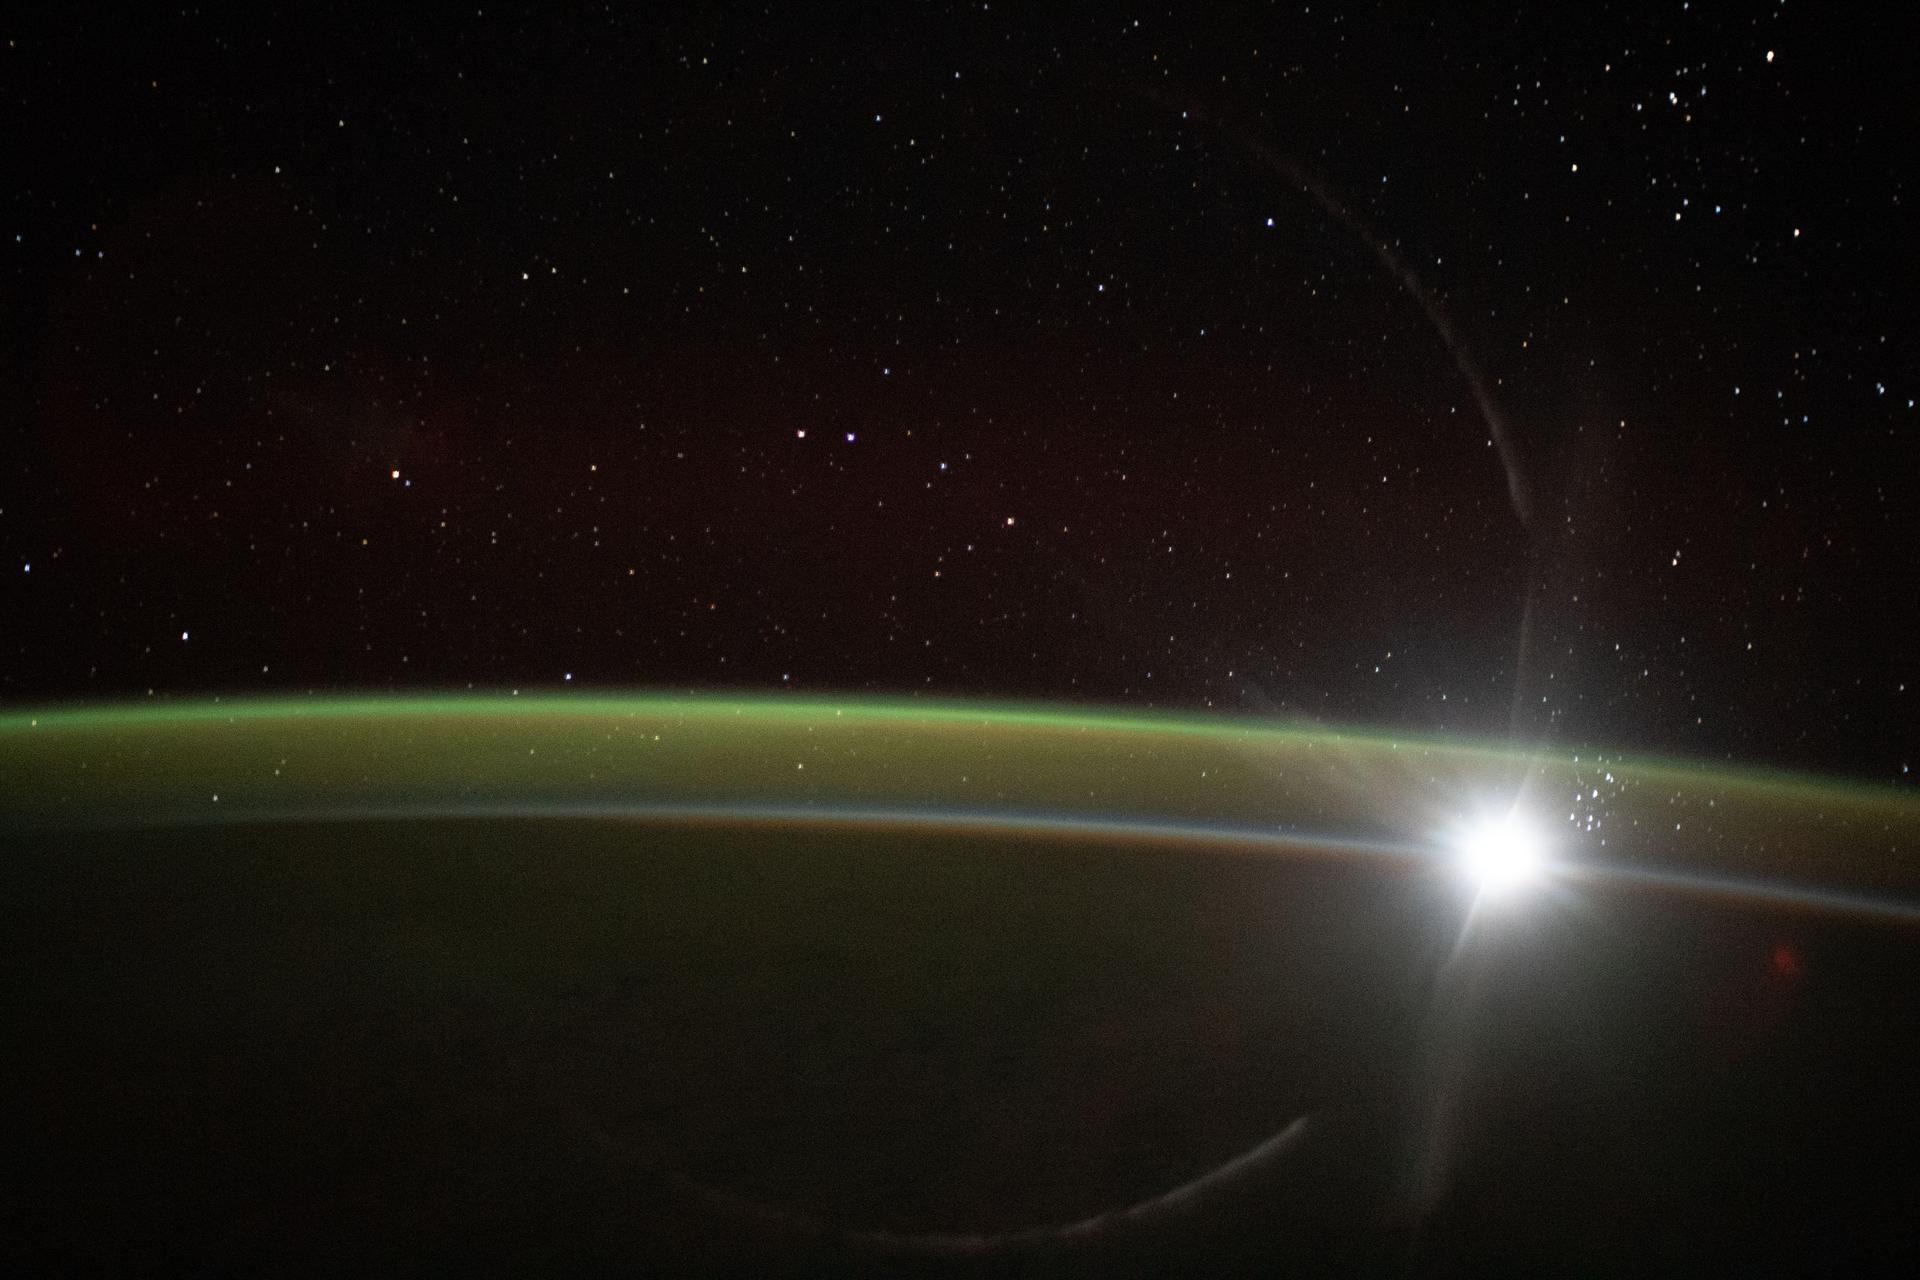 the curve of the earth, shaded in black, is blanketed by a thin green line of atmosphere. the sun peaks from the edge of the planet's curve. stars glimmer above.